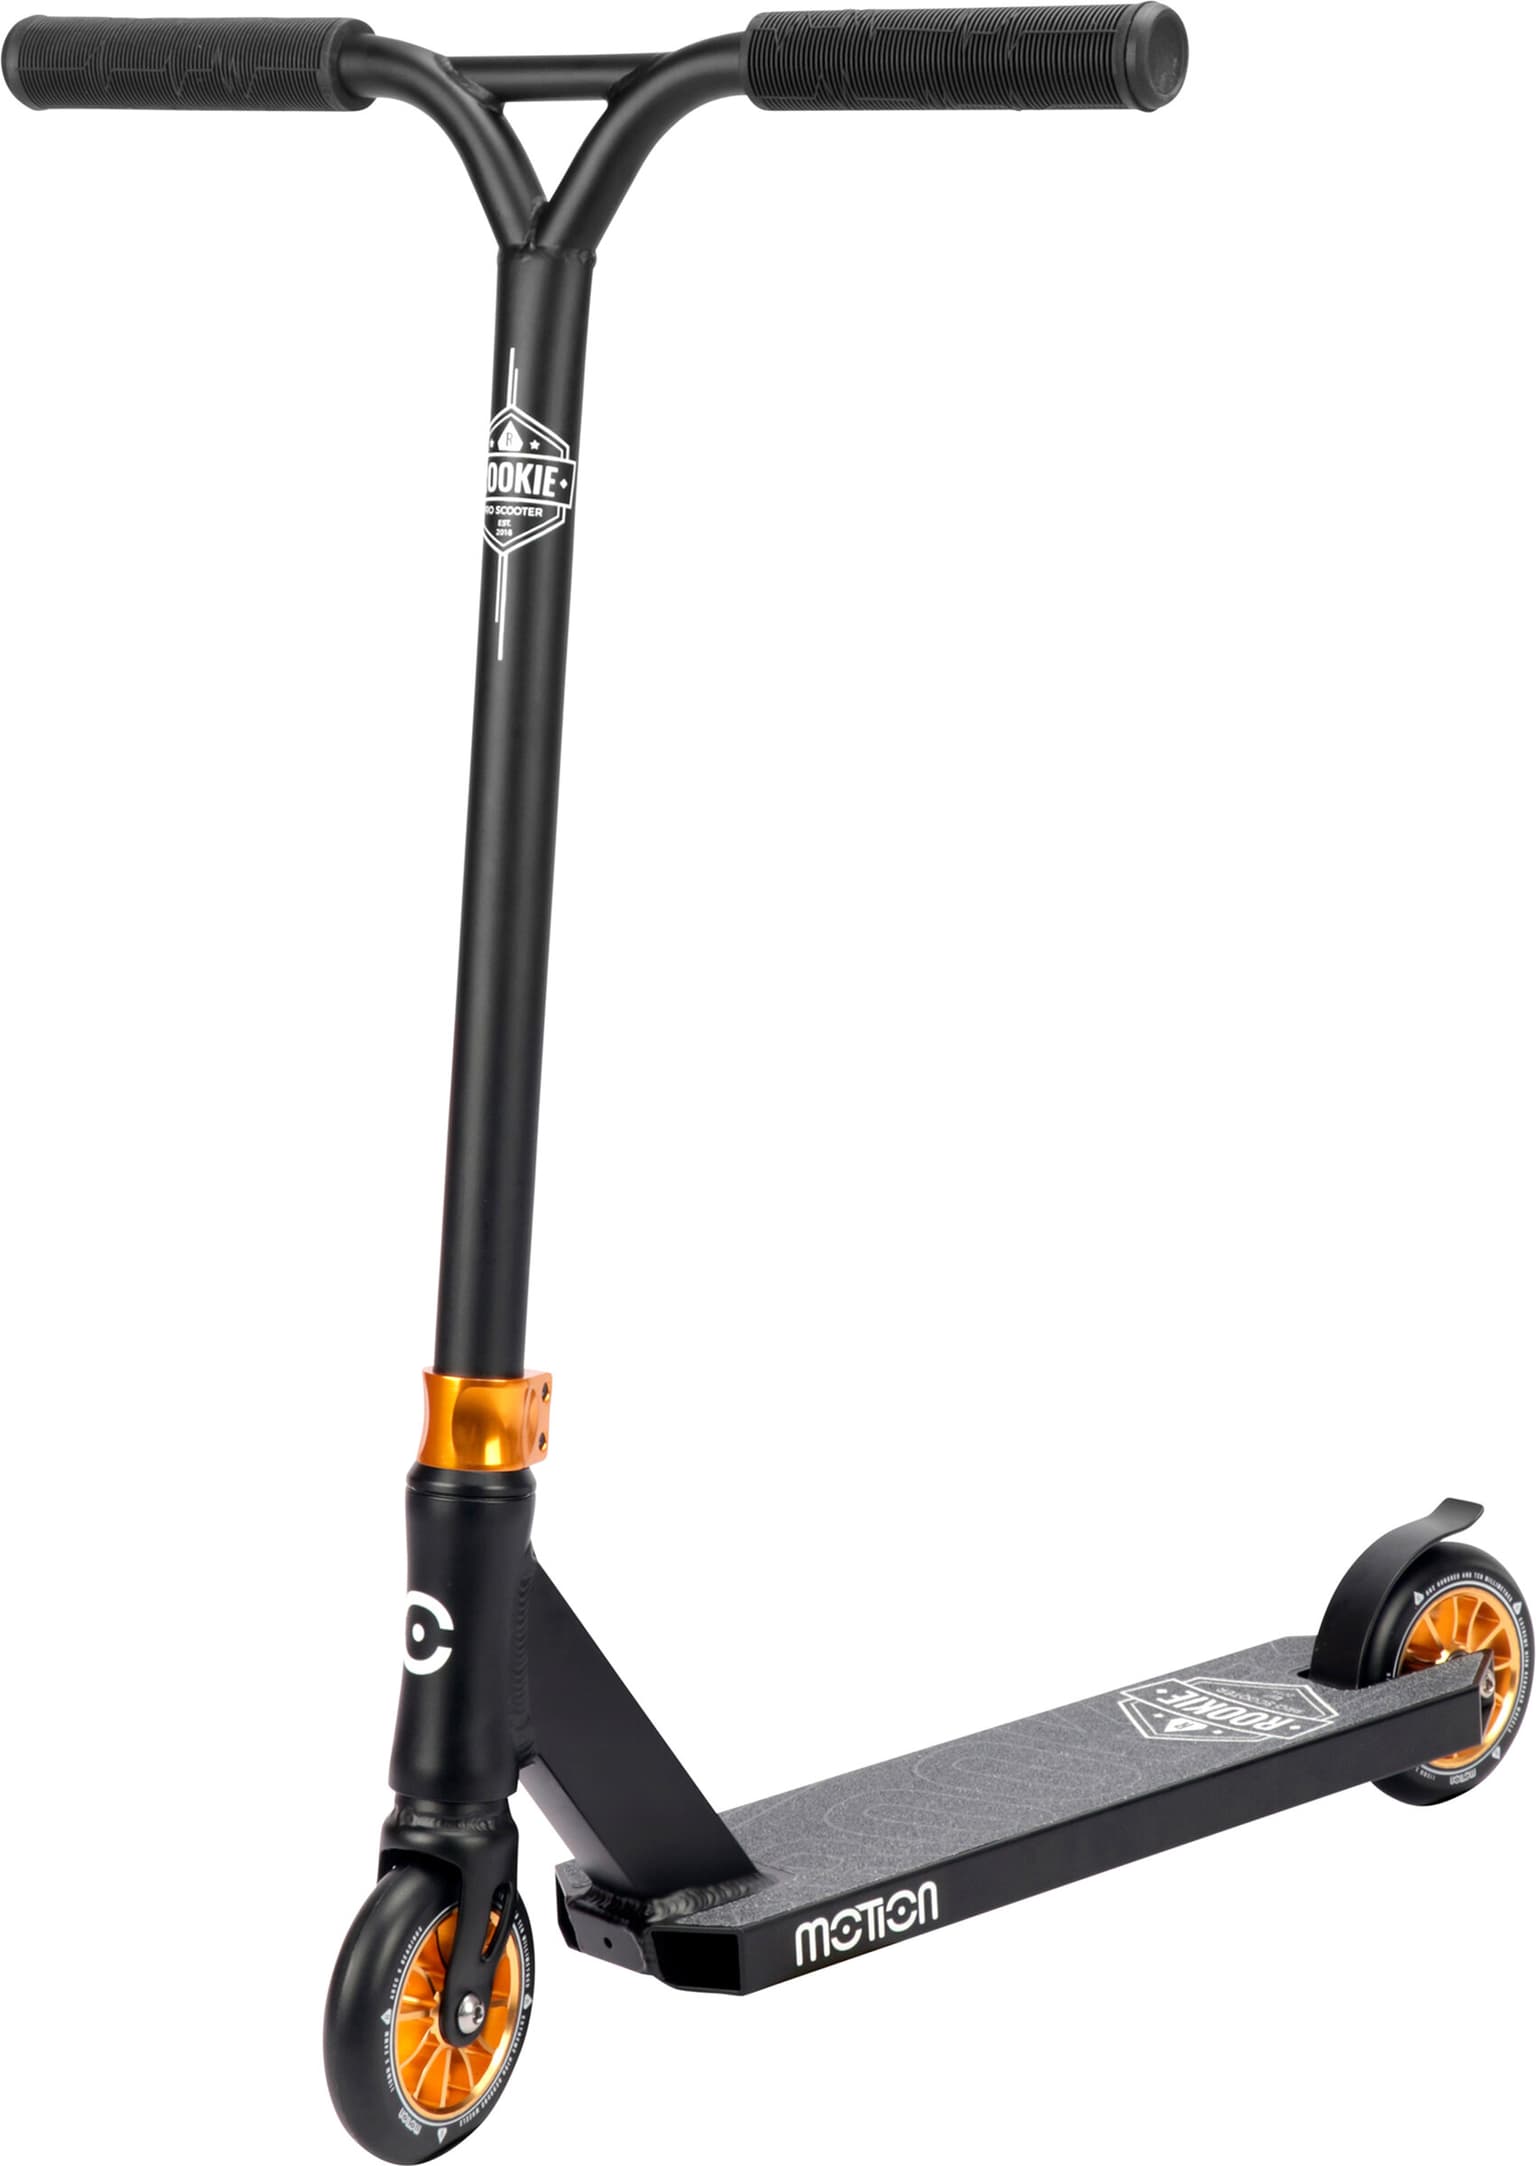 Motion Motion Rookie Pro Scooter or 1